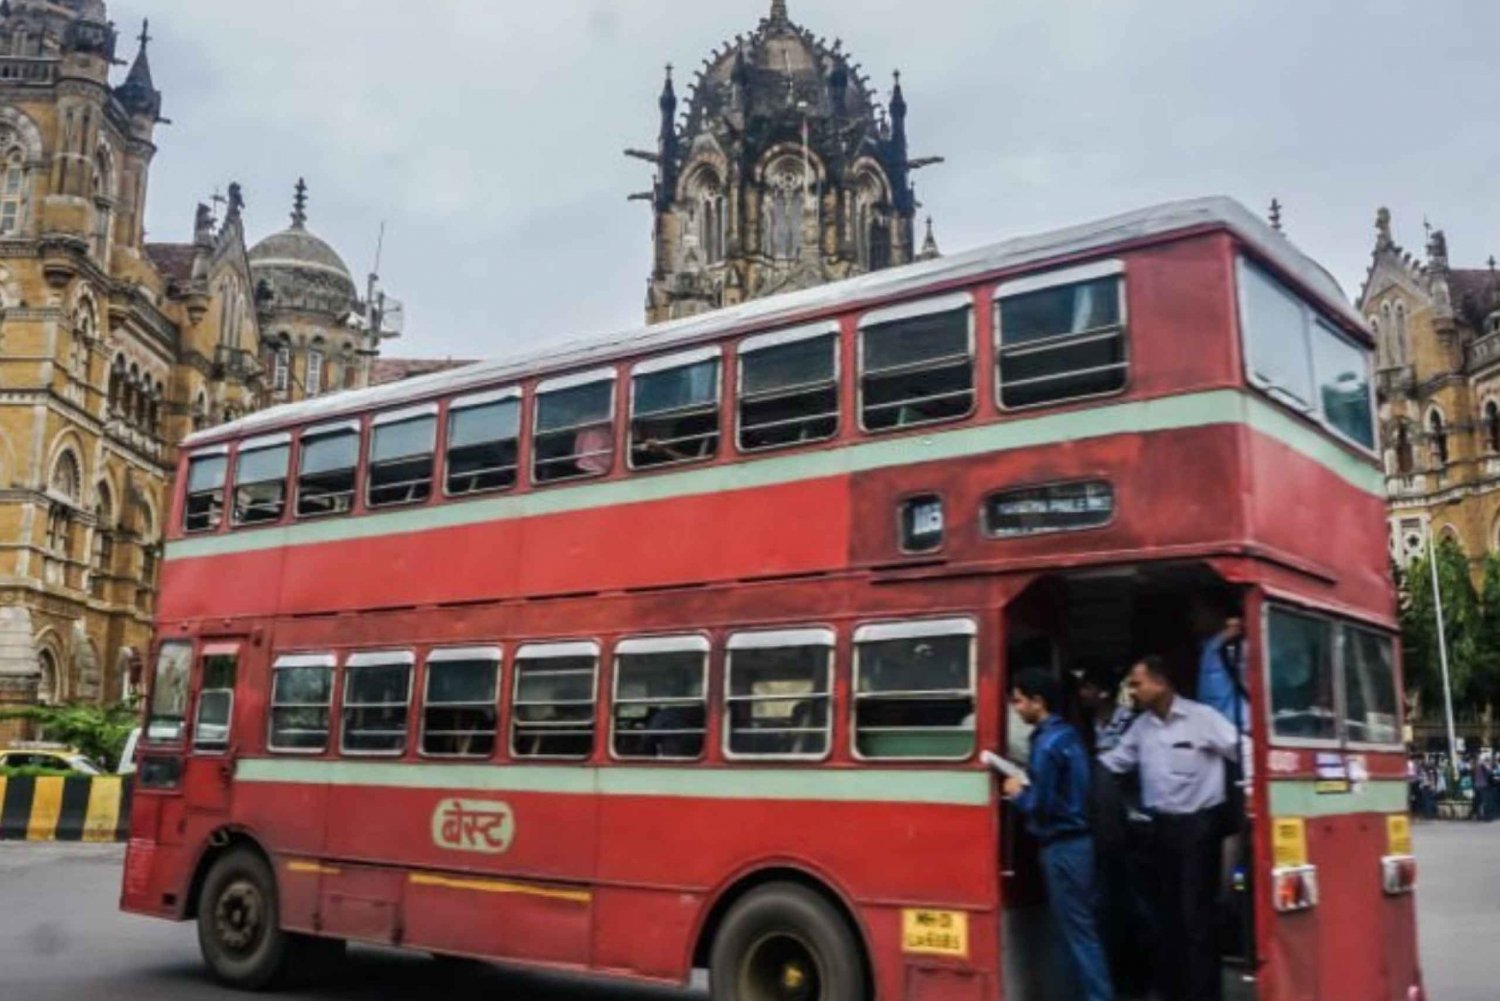 Mumbai: Private Guided Sightseeing Tour by Car